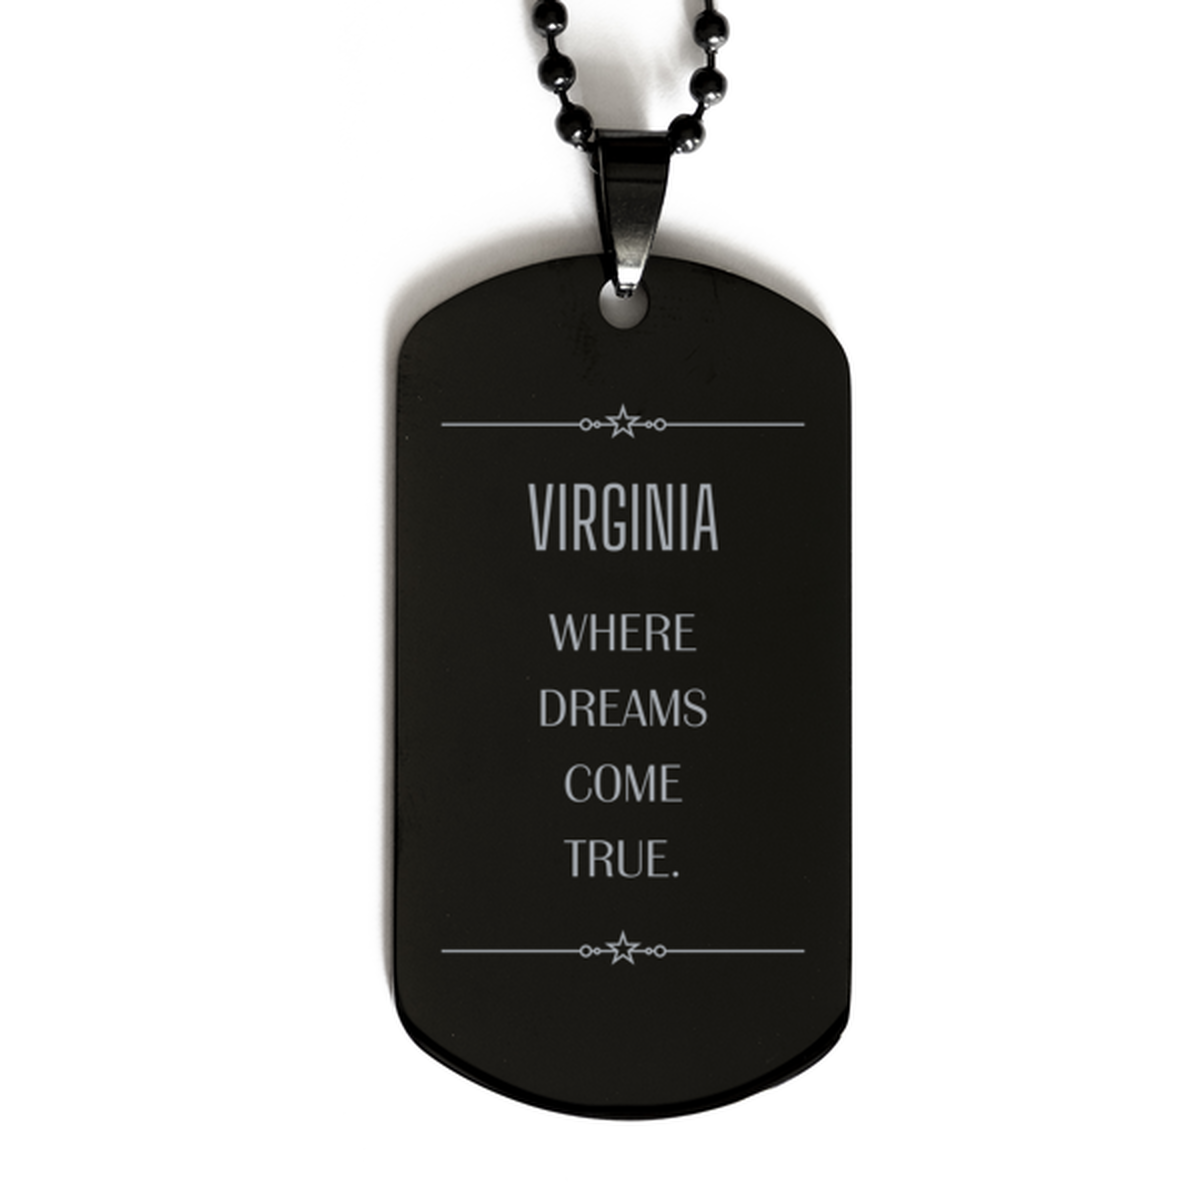 Love Virginia State Black Dog Tag, Virginia Where dreams come true, Birthday Inspirational Gifts For Virginia Men, Women, Friends